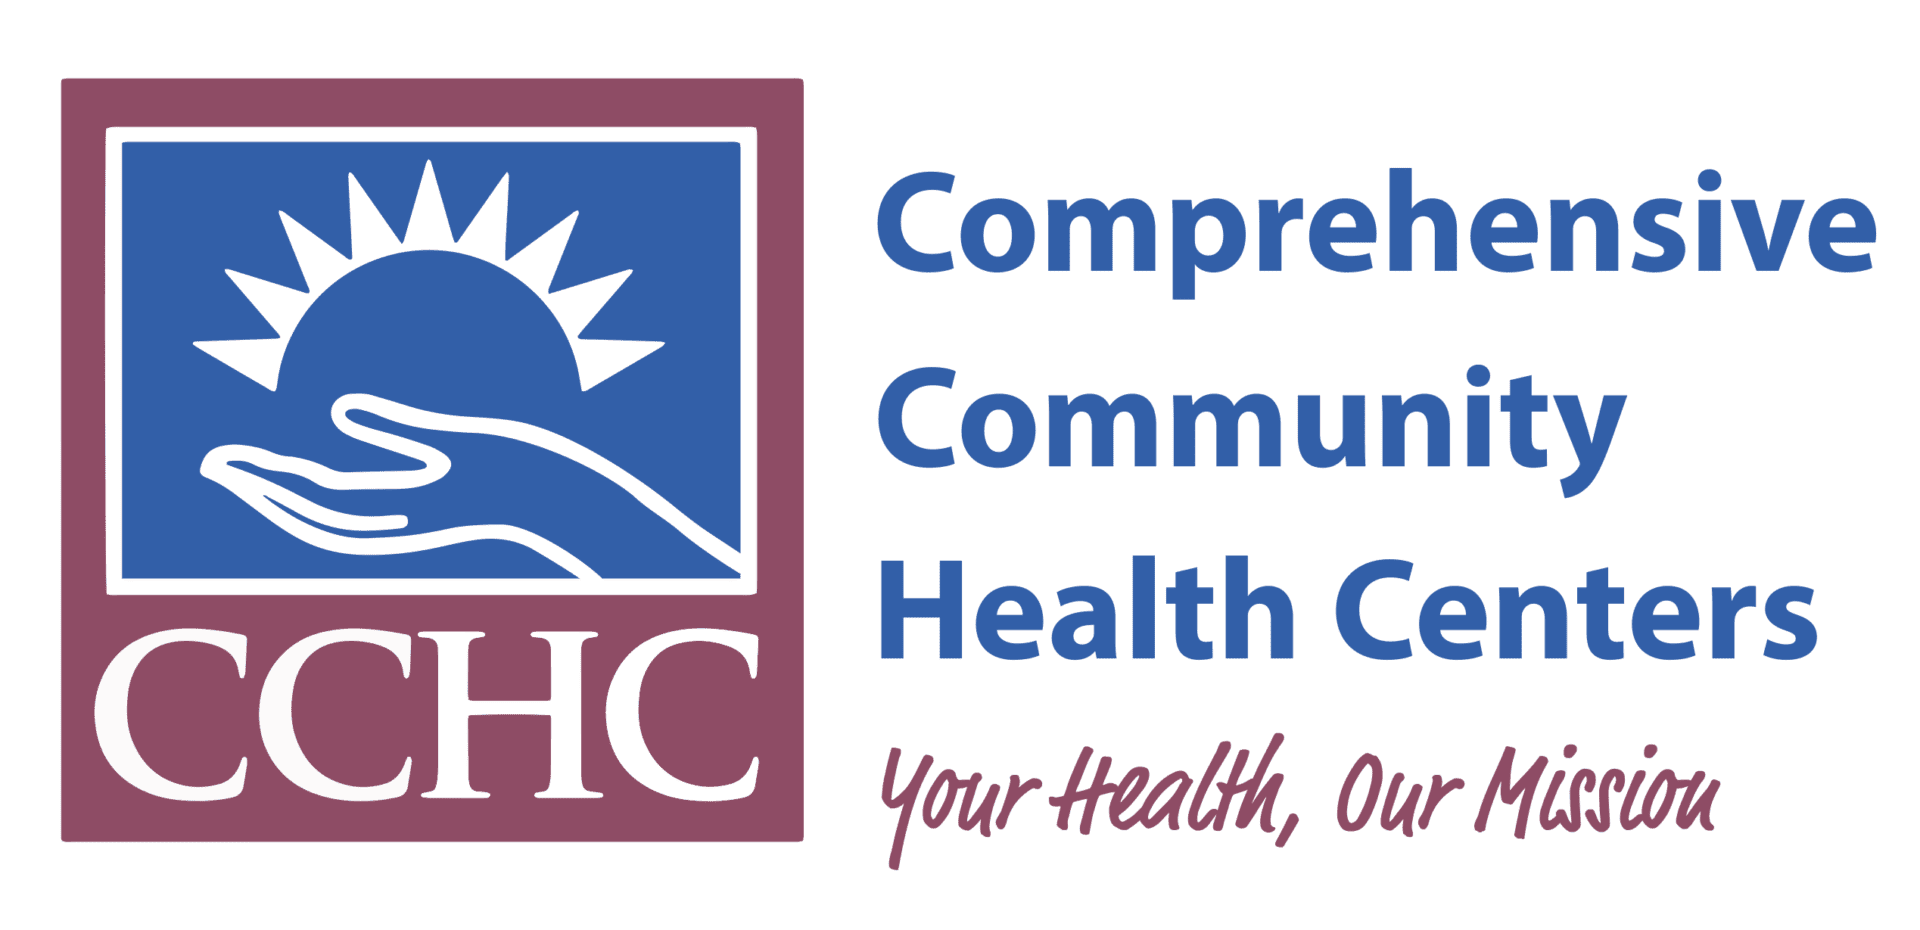 The logo for comprehensive community health centers.